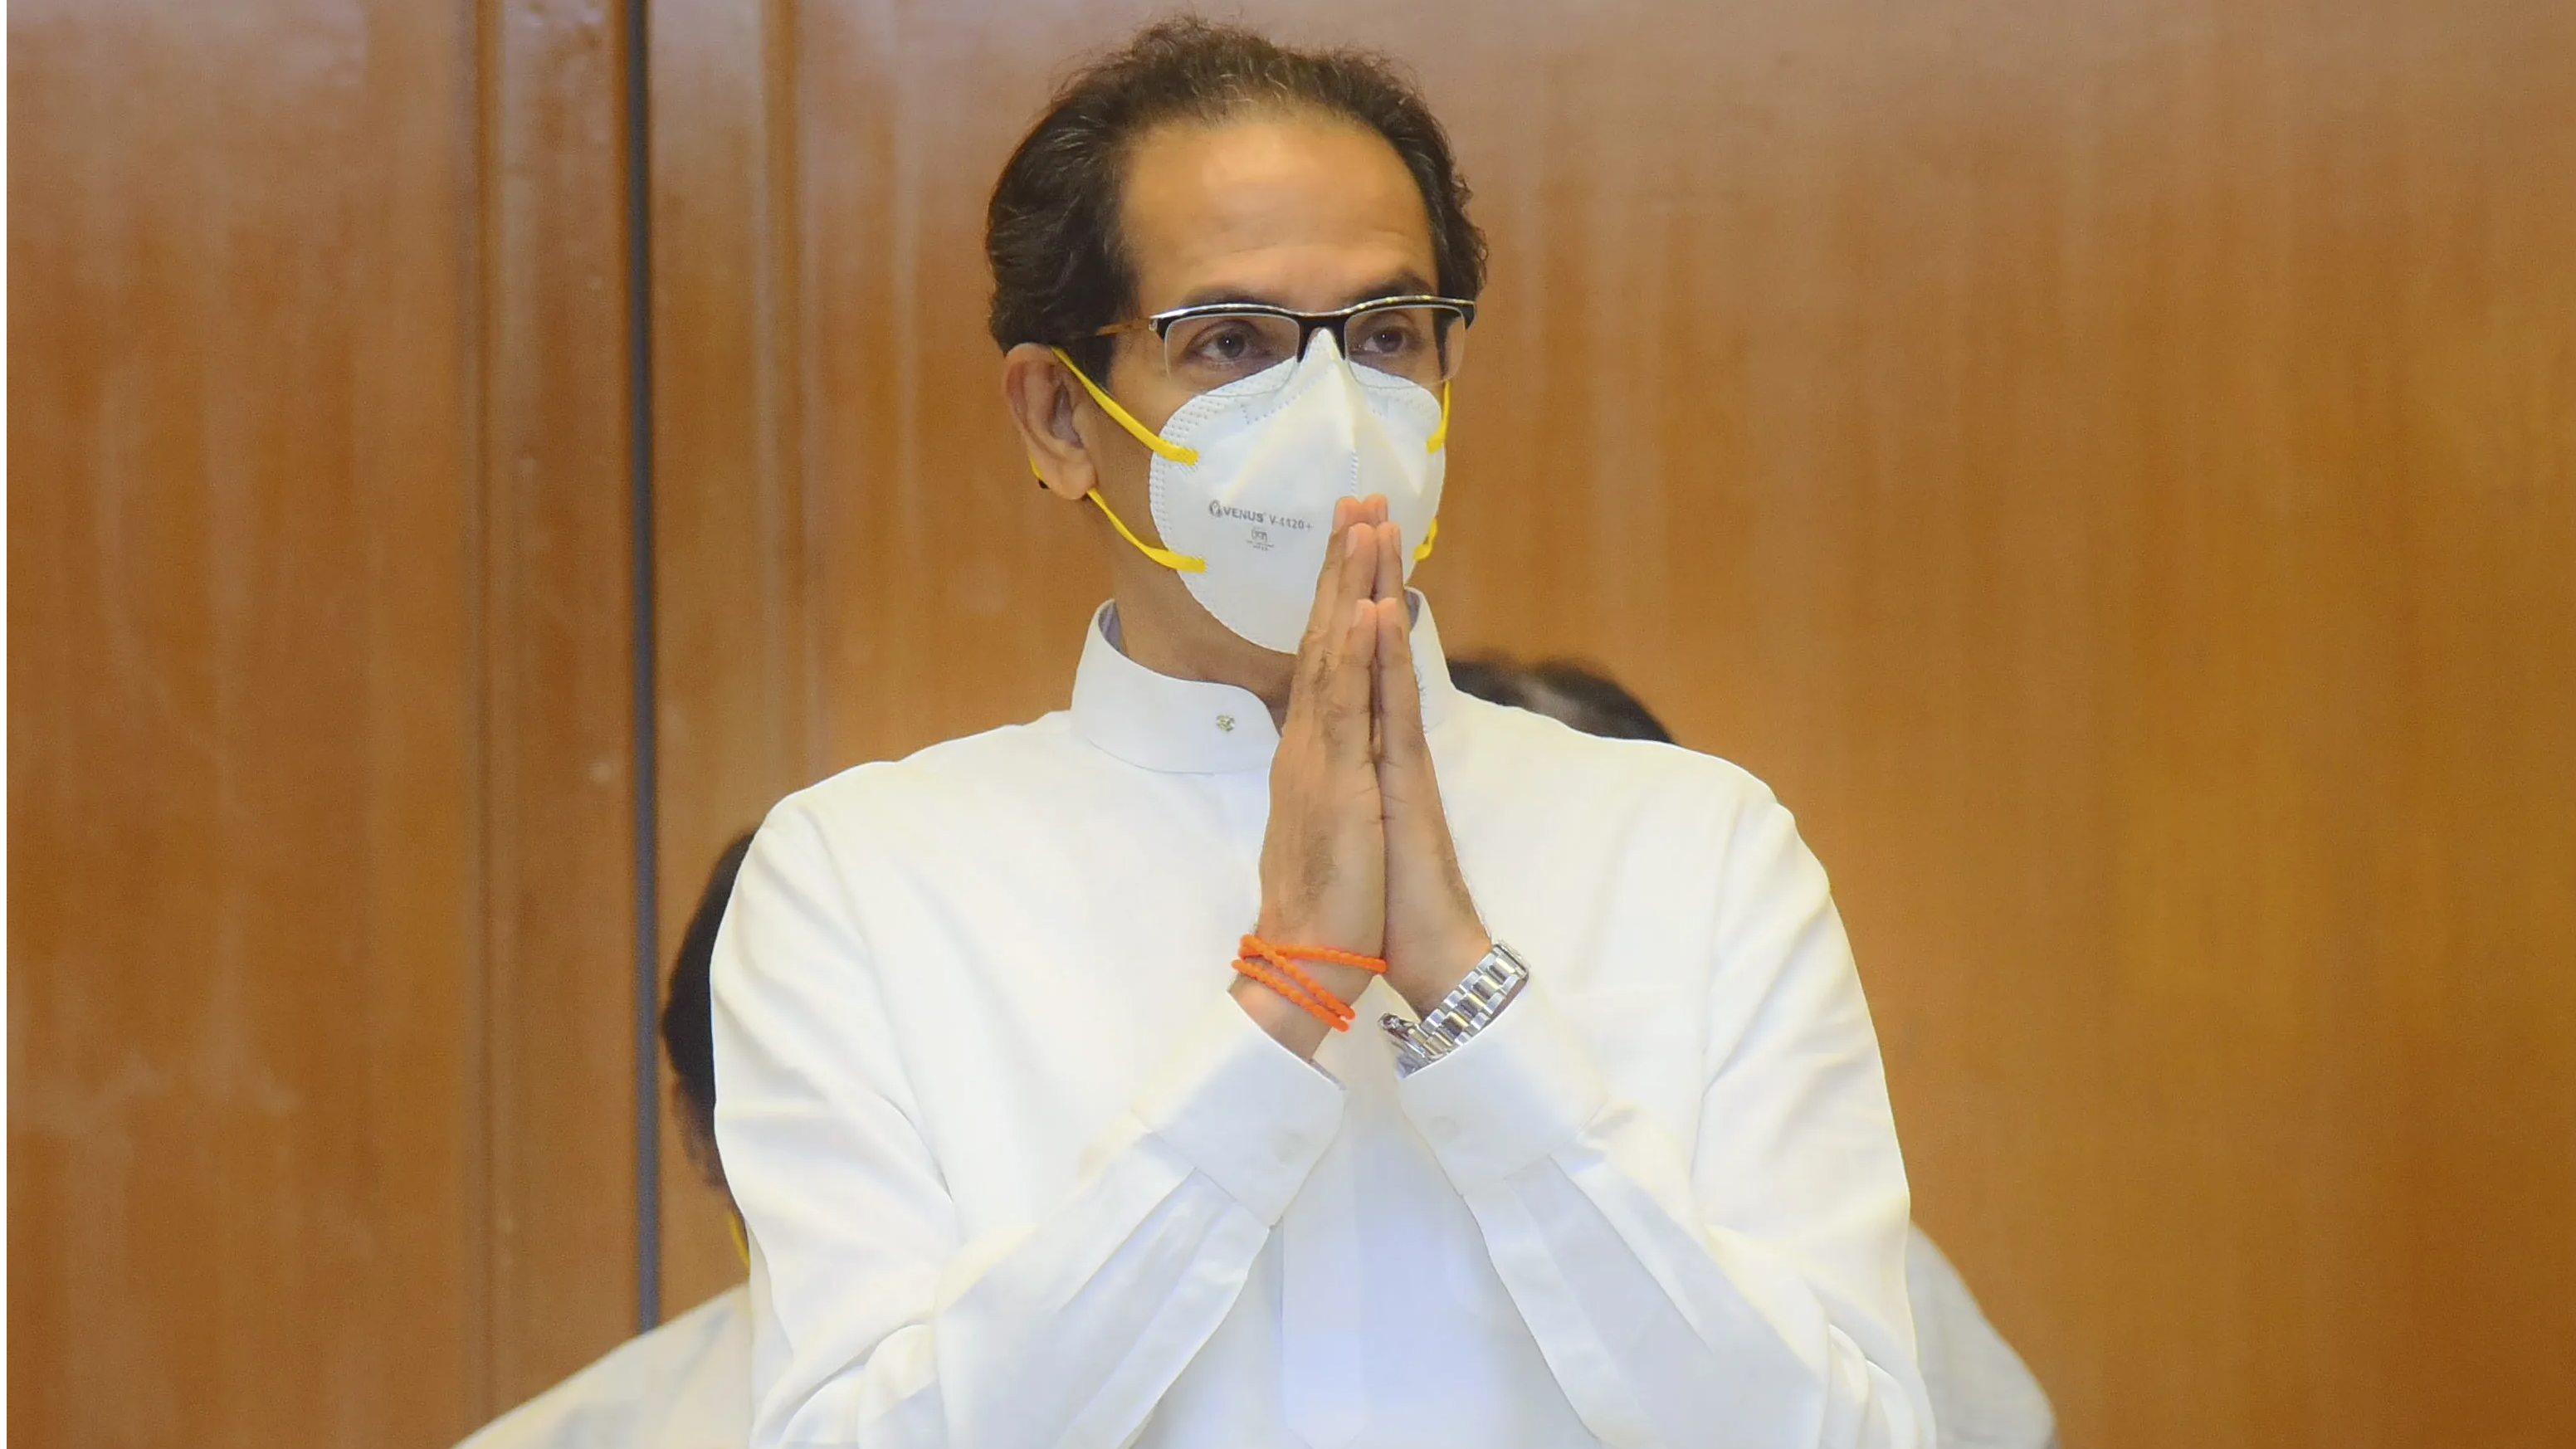 ‘Will announce strict actions in 1-2 days’: Maha CM Uddhav Thackeray on COVID-19 surge